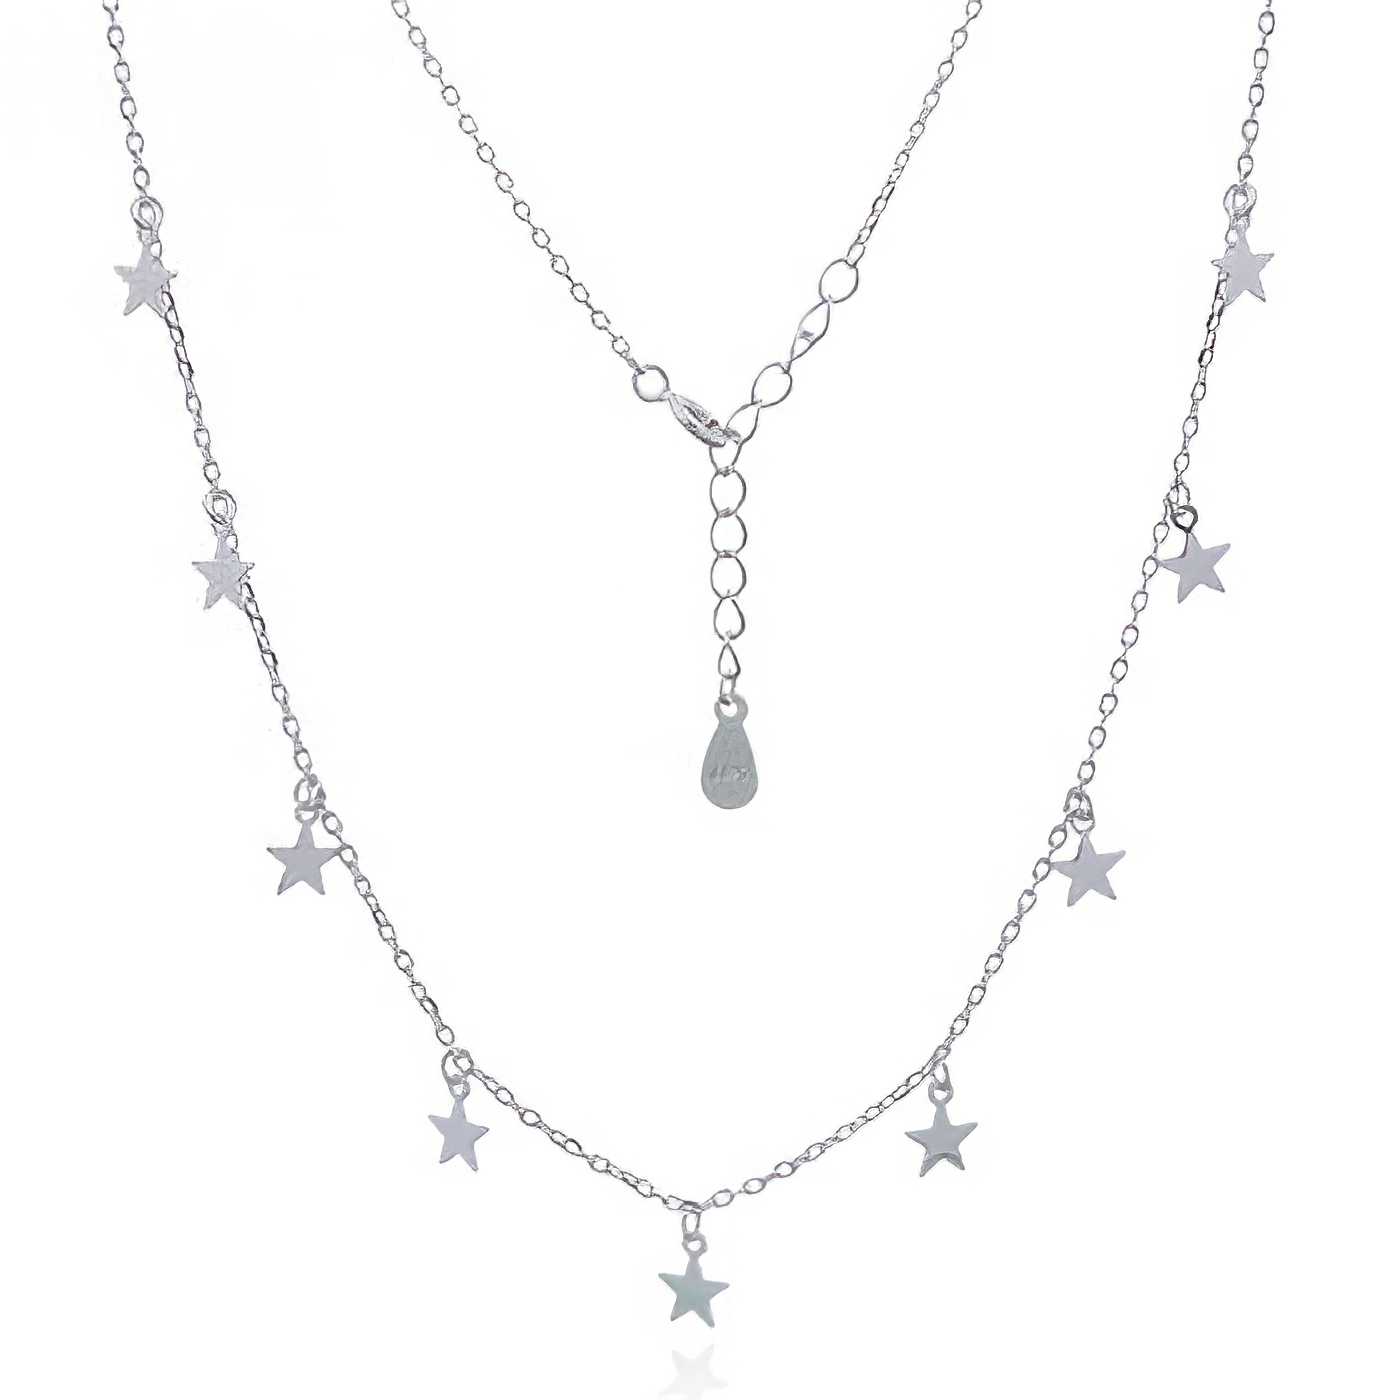 Stars 925 Chain Necklace Silver Plated by BeYindi 